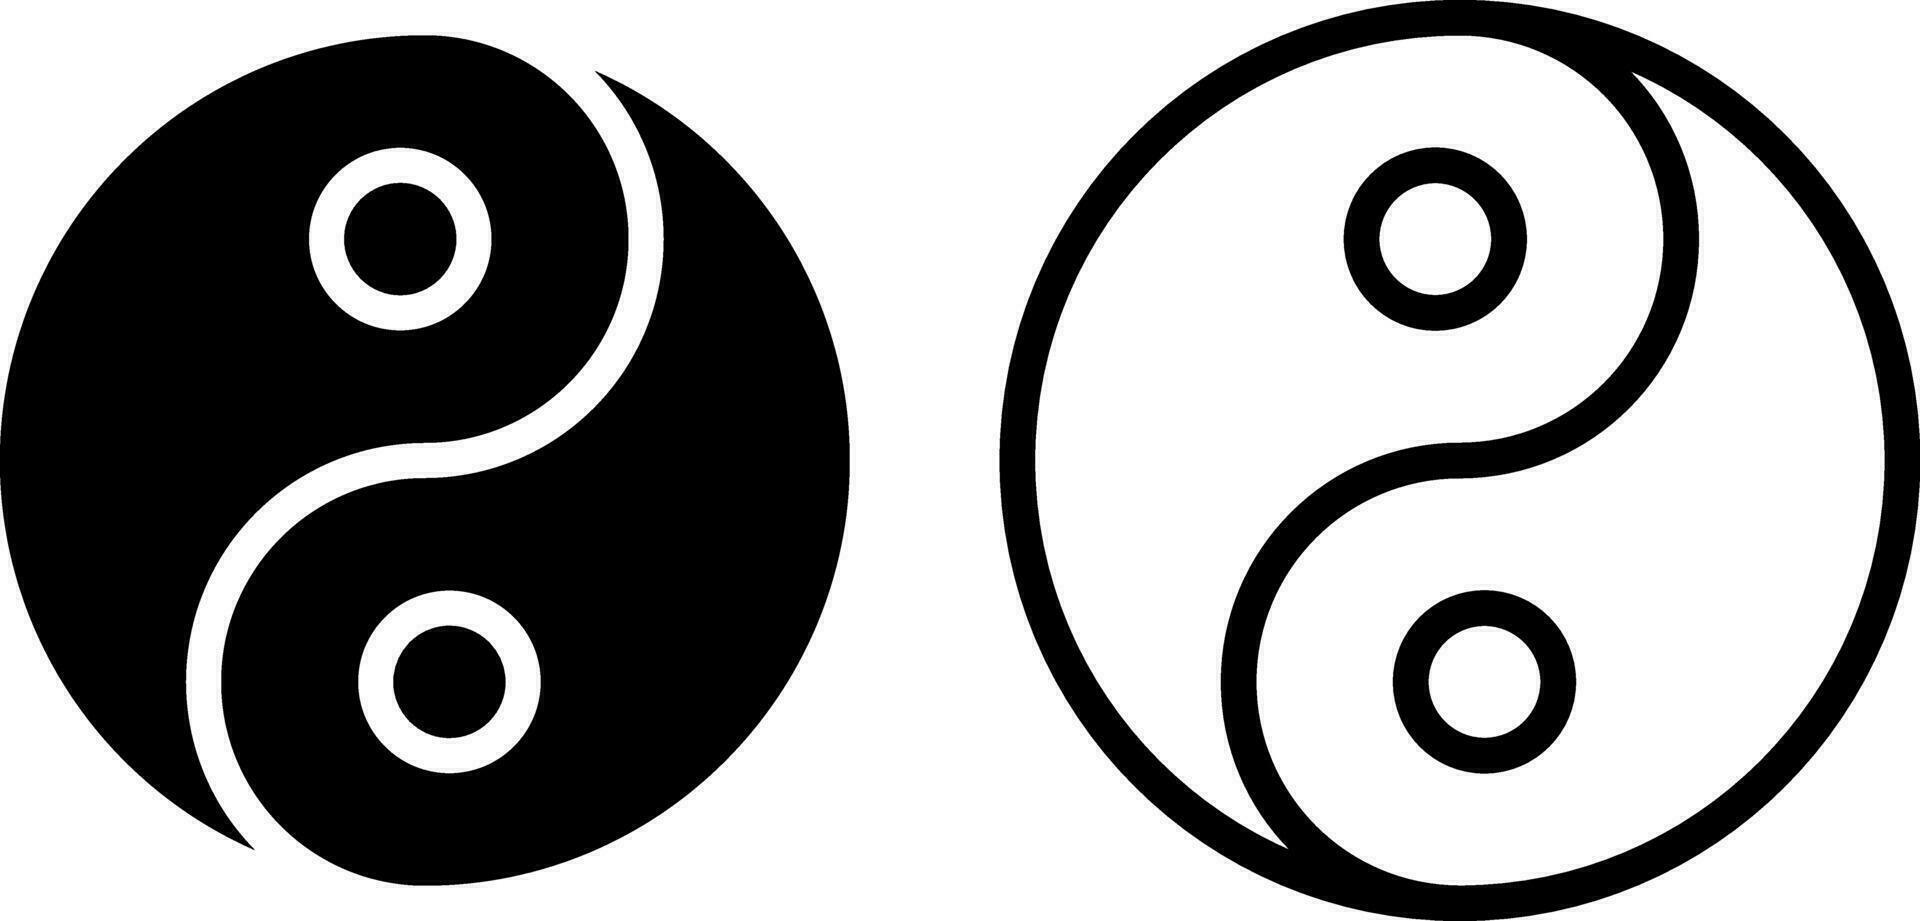 yin and yang icon, sign, or symbol in glyph and line style isolated on transparent background. Vector illustration